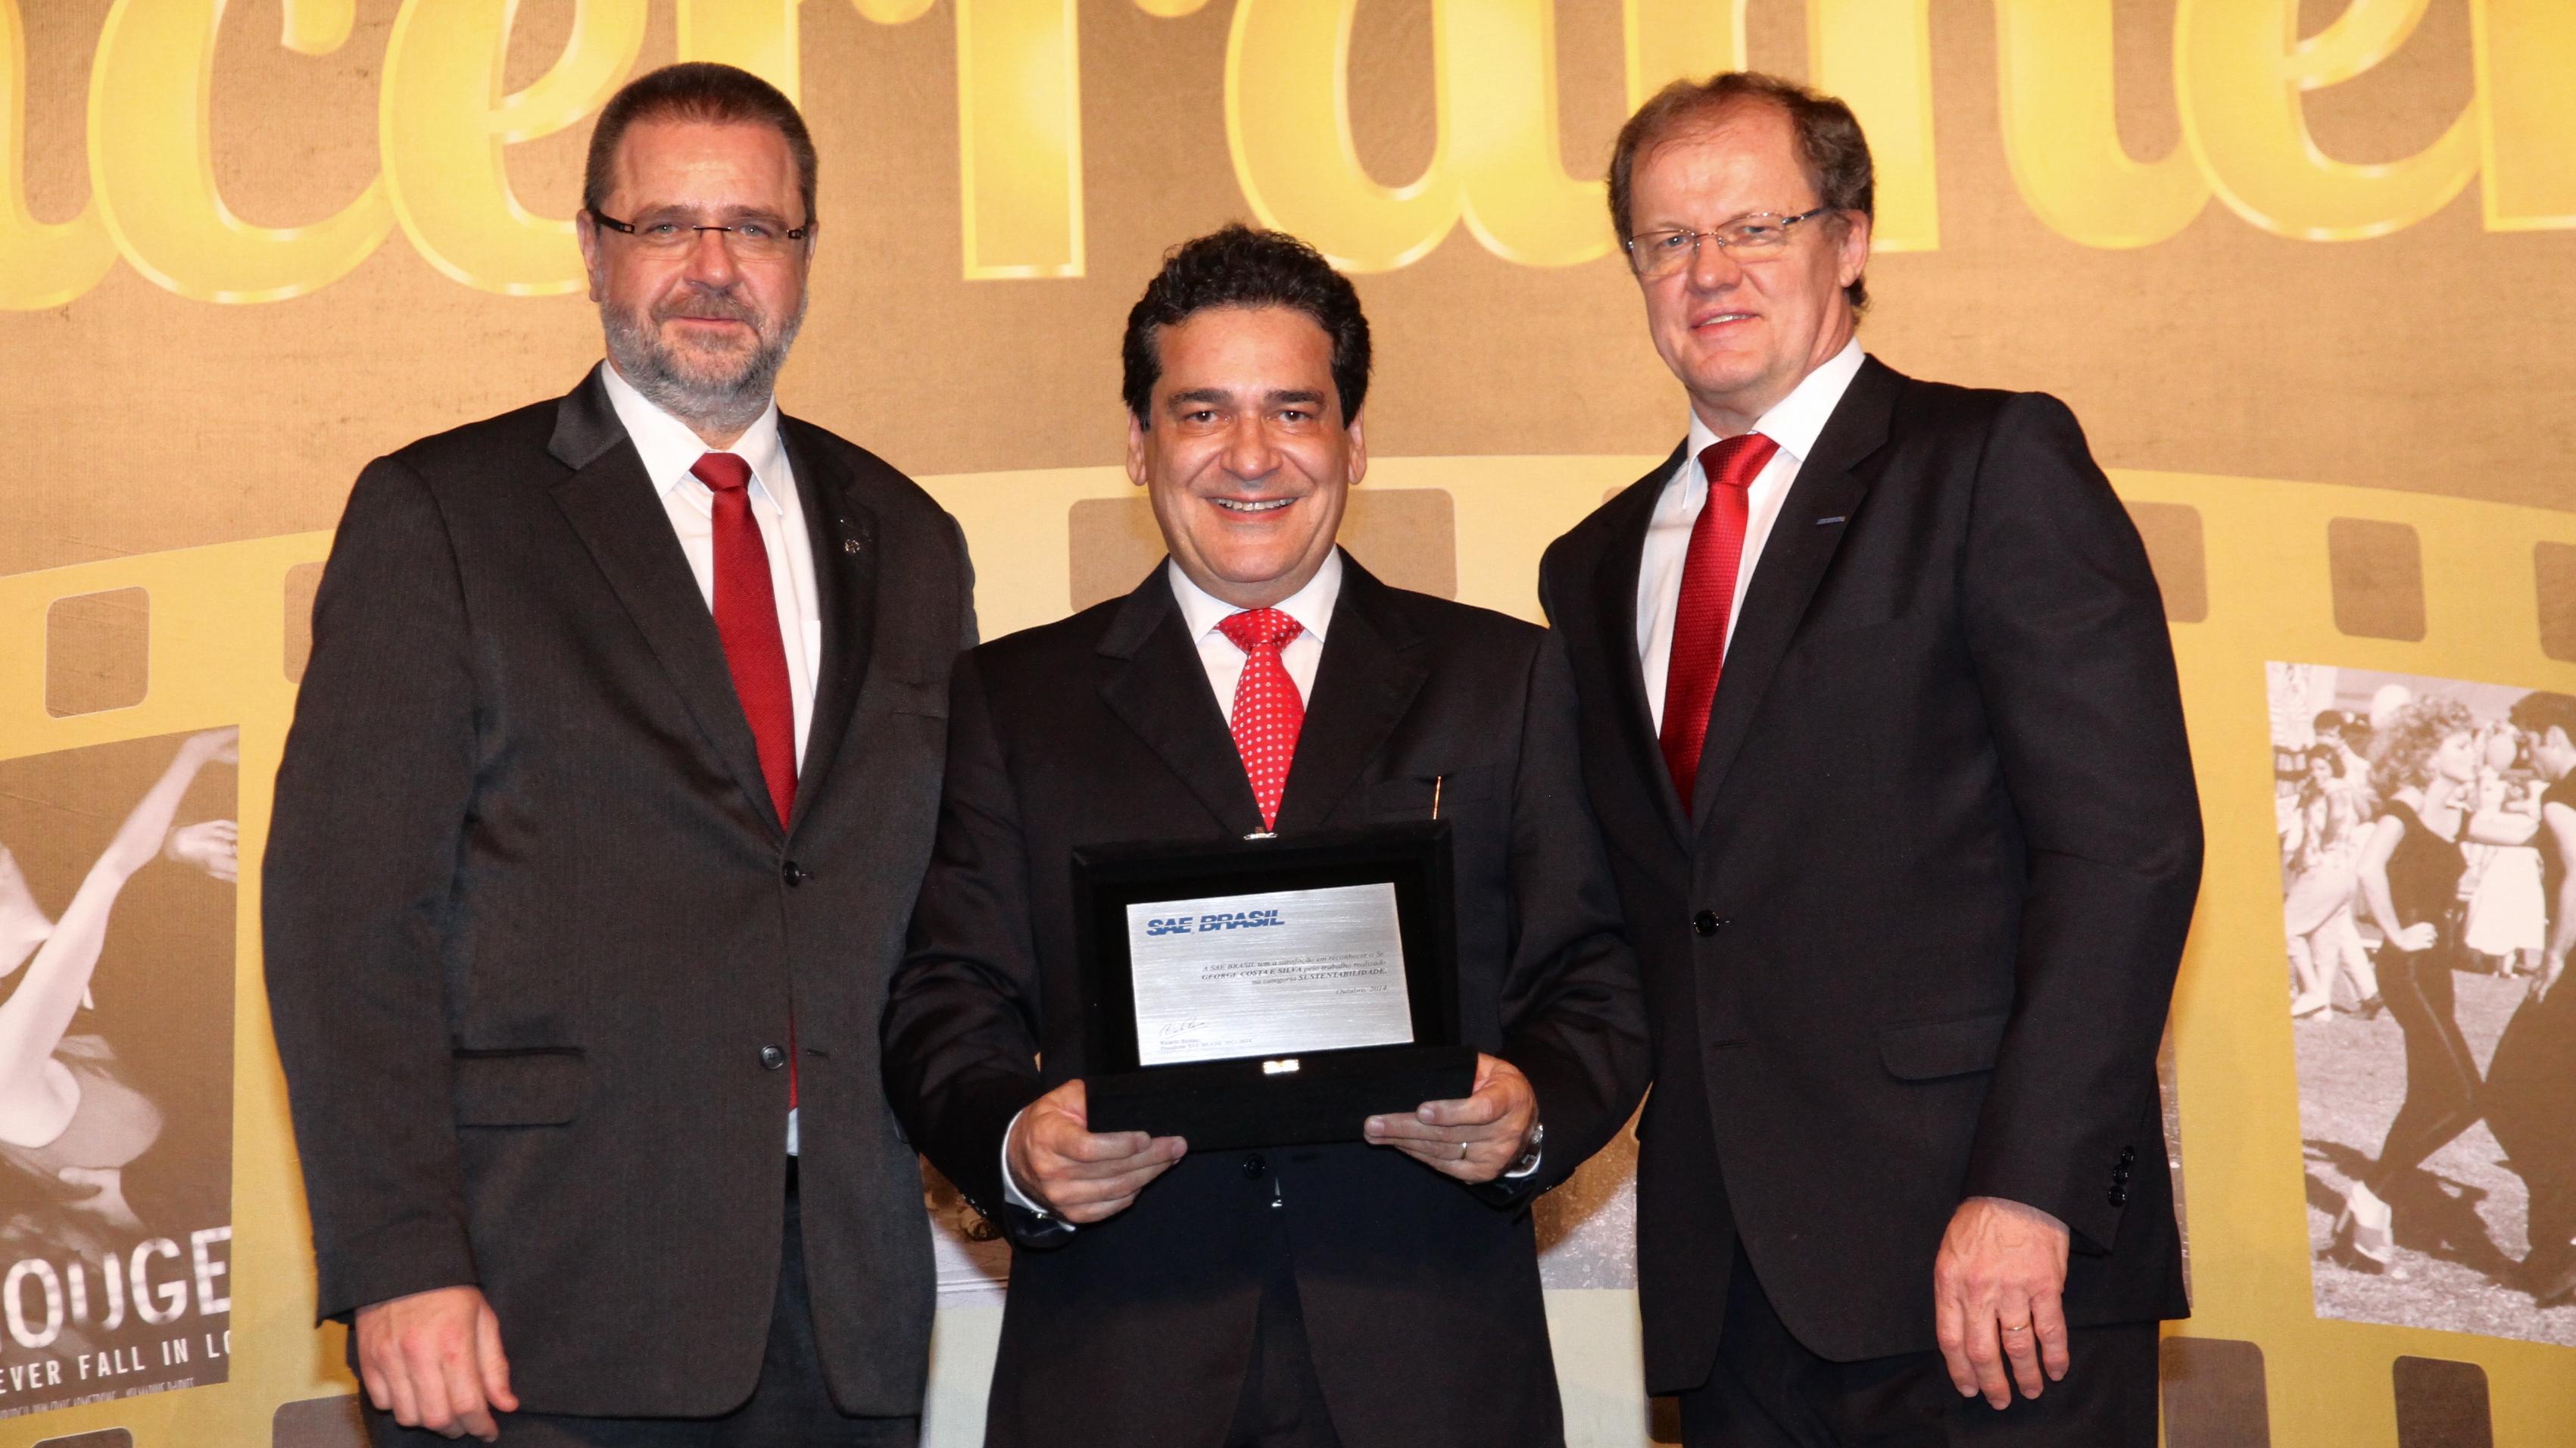 George Costa e Silva (center) receiving the award from Frank Sowade, vice-president of SAE Brazil (left) and Ricardo Reimer, president of SAE Brazil (right)